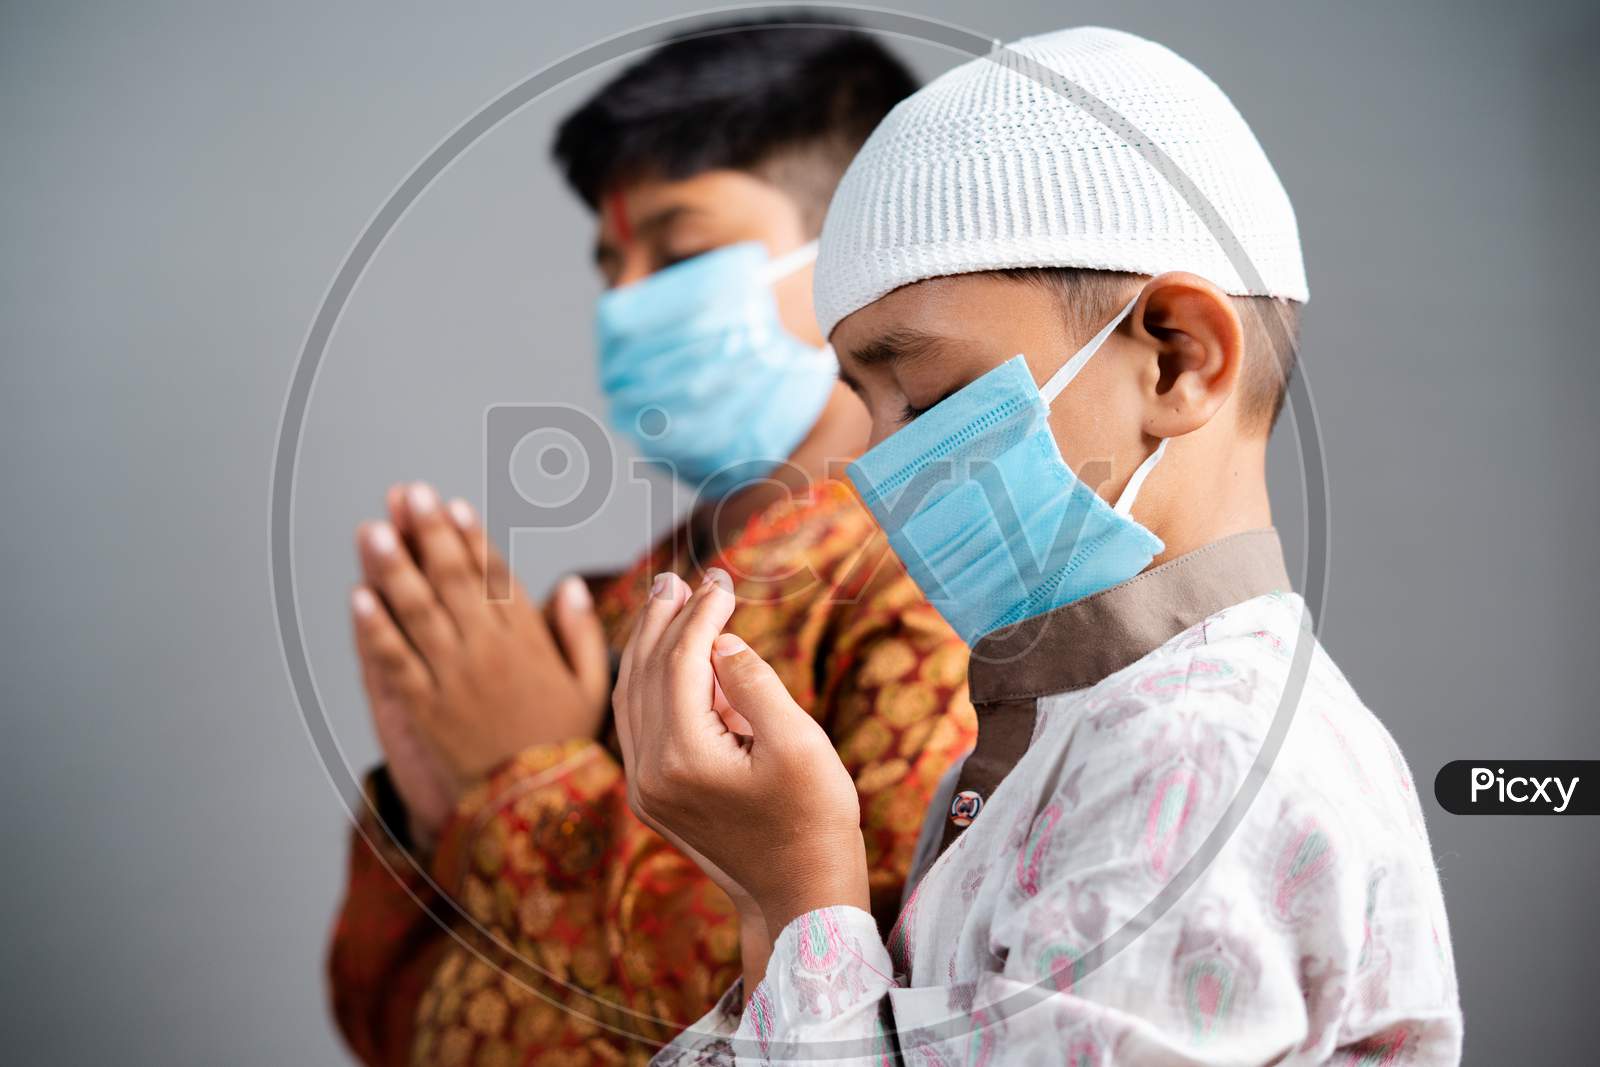 Multiethnic Kids With Medical Face Mask Praying Together By Folding Hands To Protect From Coronavirus Pandemic - Concept Of Friendship, Communal Harmony During Covid-19 Outbreak